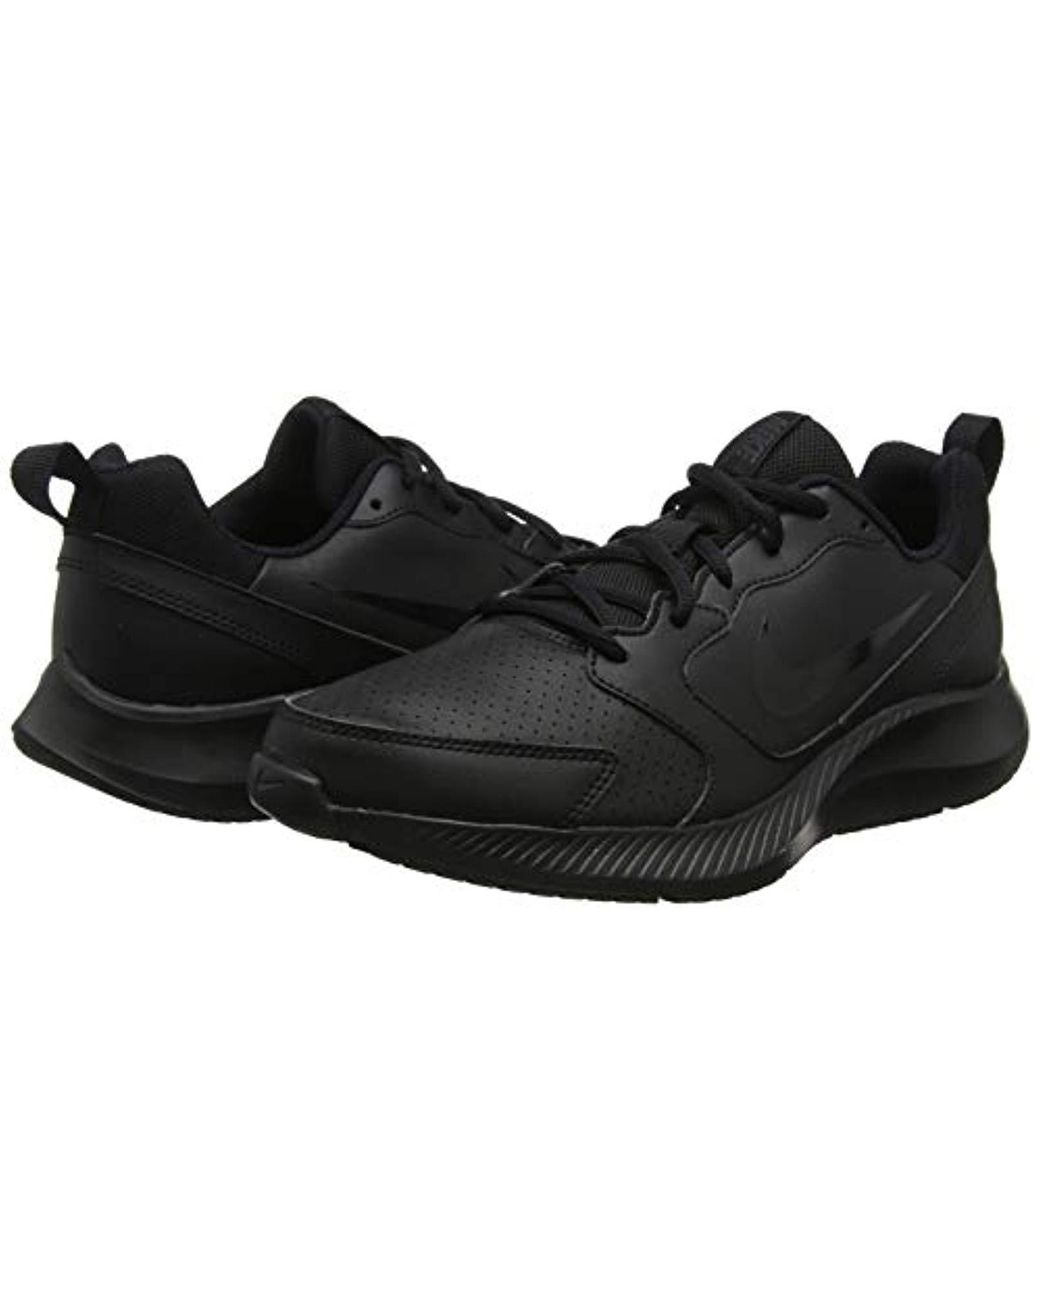 Nike Leather Todos Rn Shoe in Black/White (Black) | Lyst